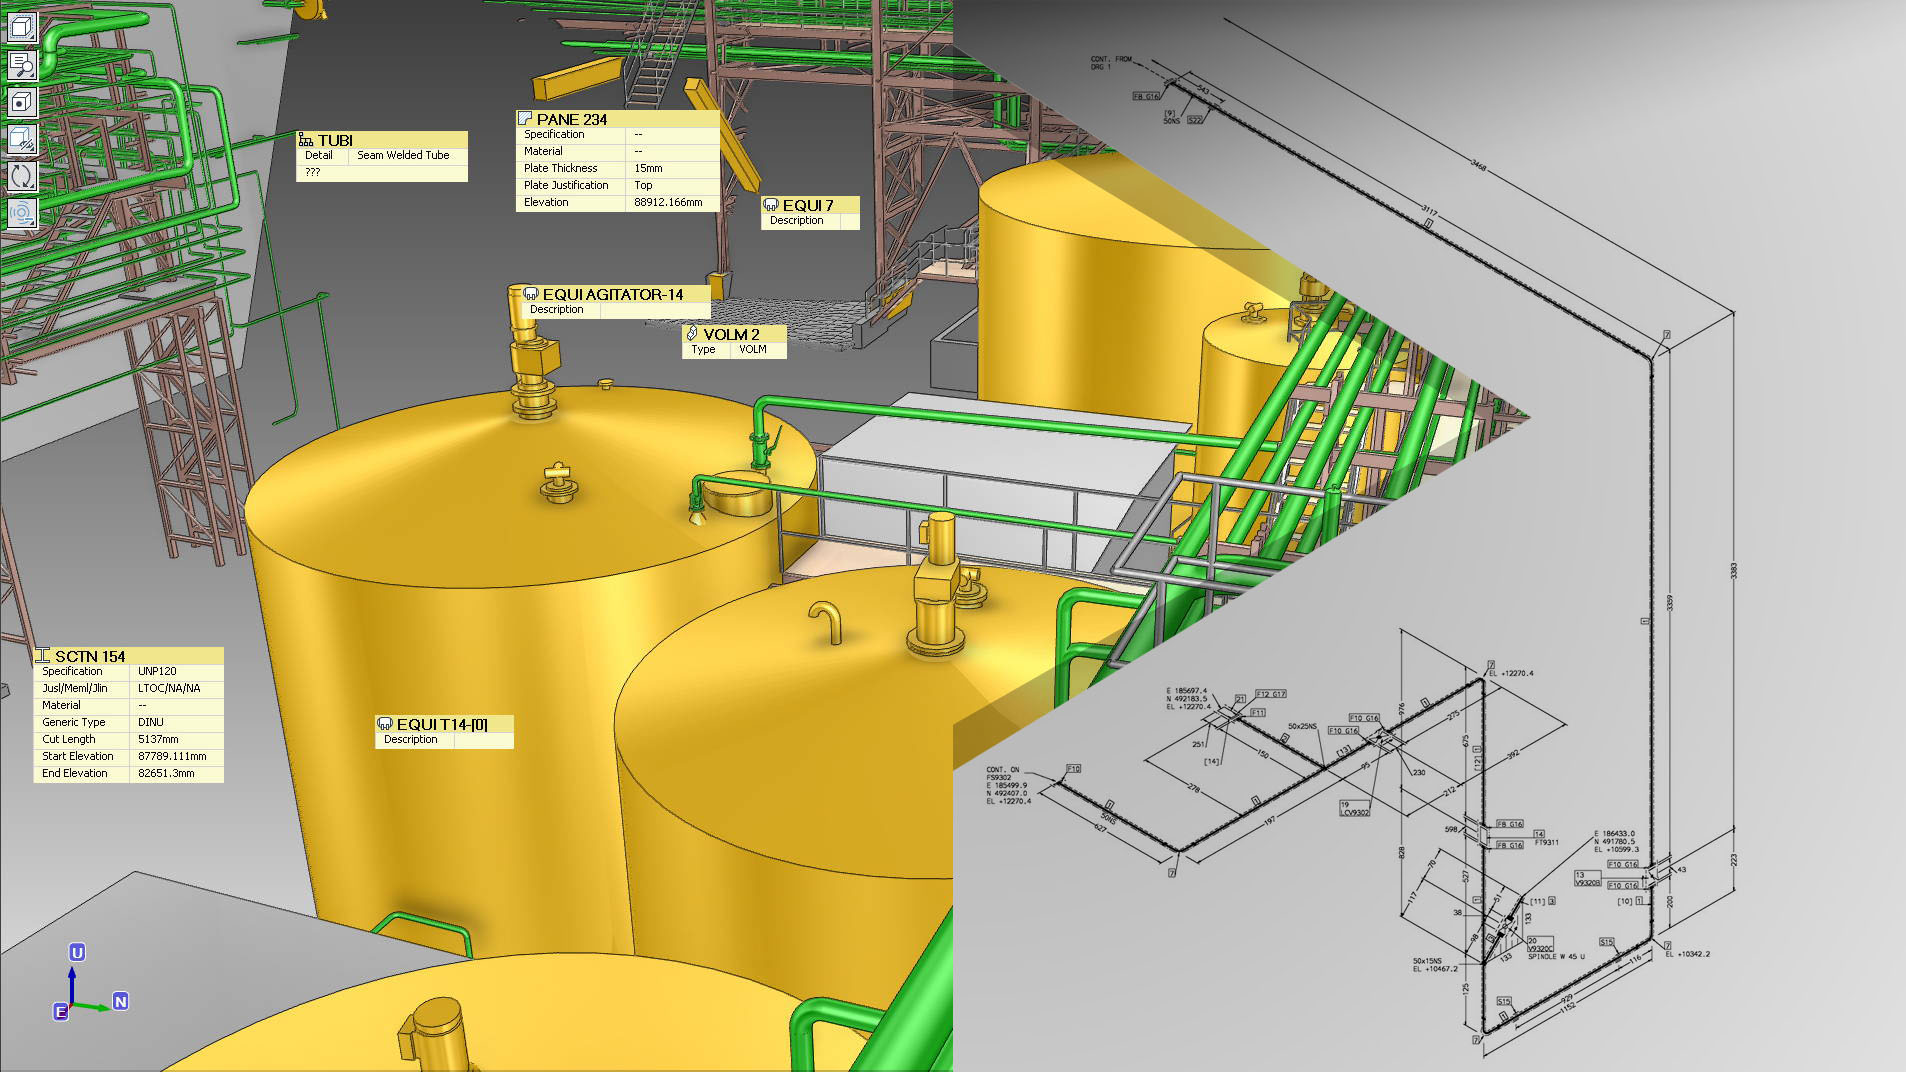 Revolutionize Your Design Process with 3Deling's Autocad 3D Modeling and Plant Digitization Services